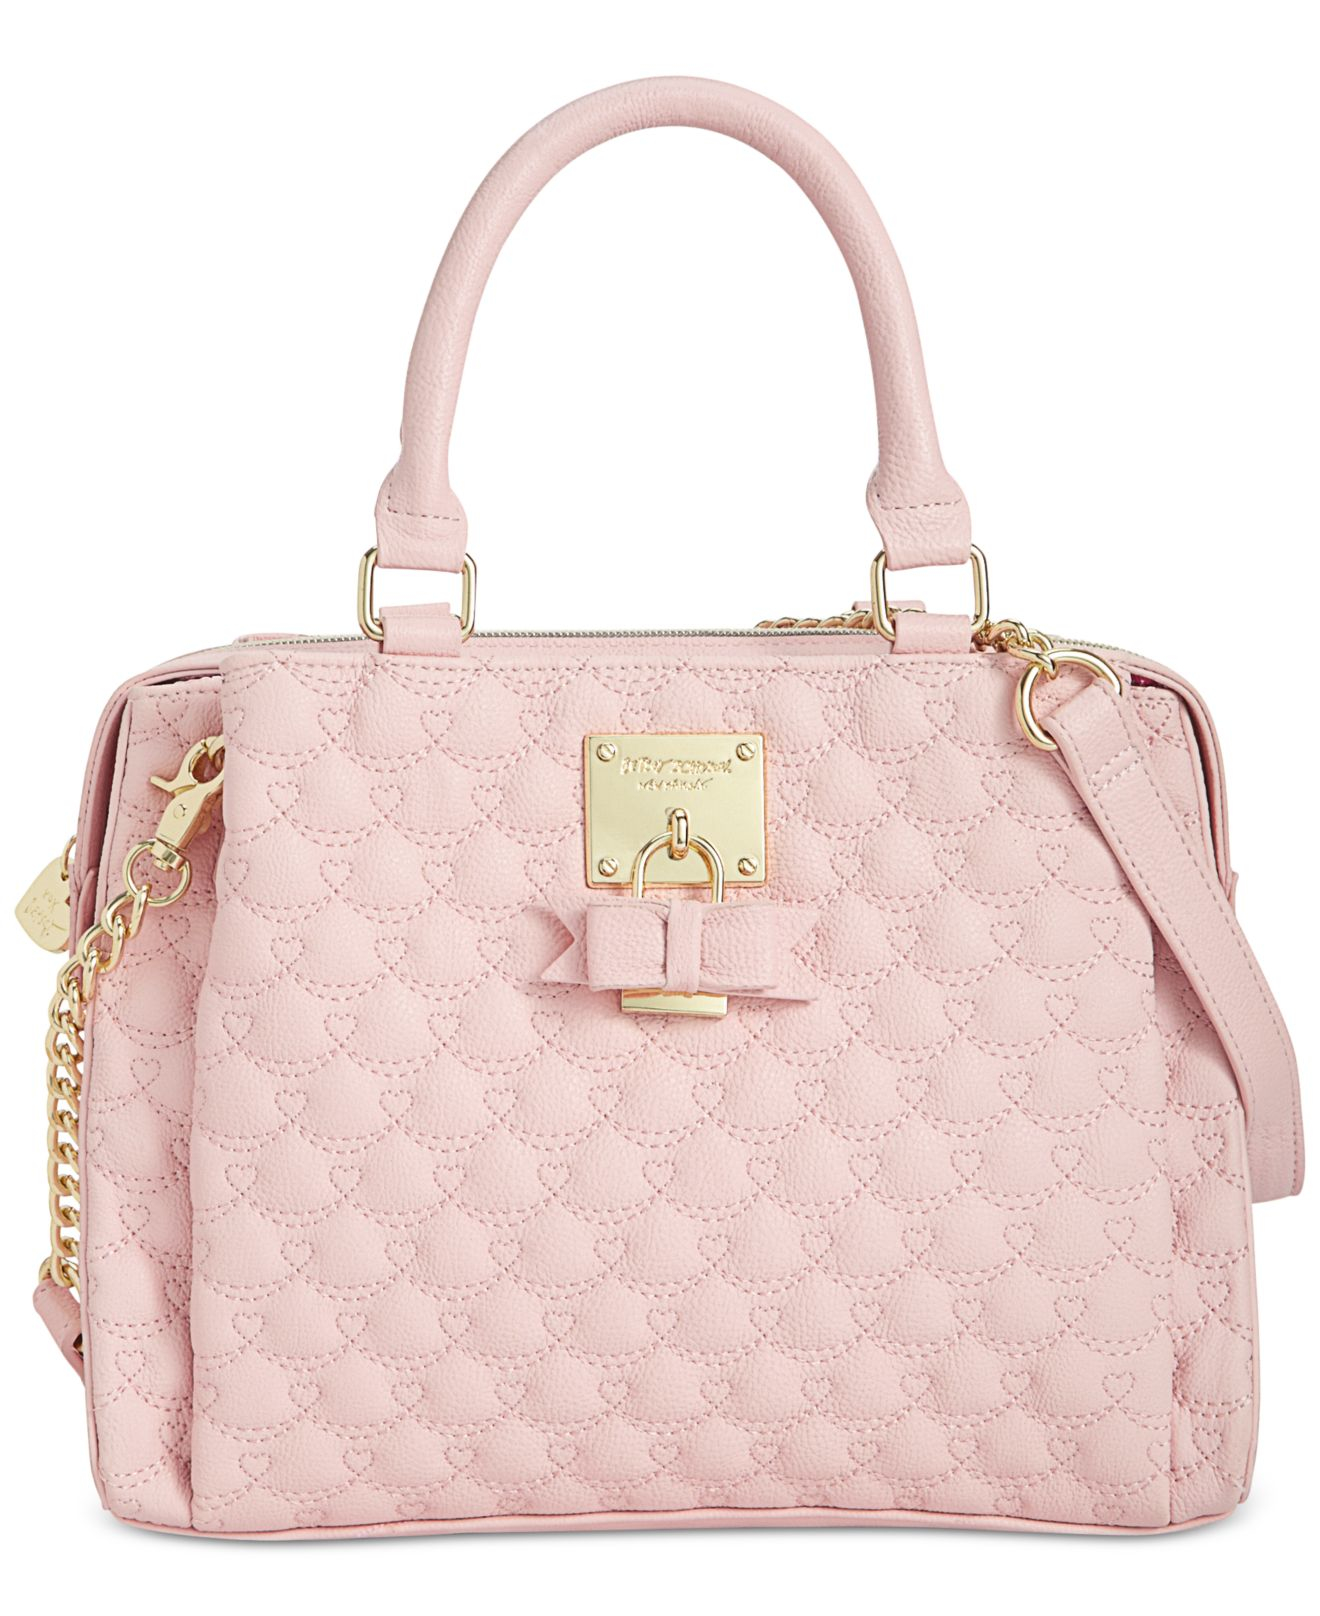 Lyst - Betsey Johnson Triple Compartment Satchel in Pink